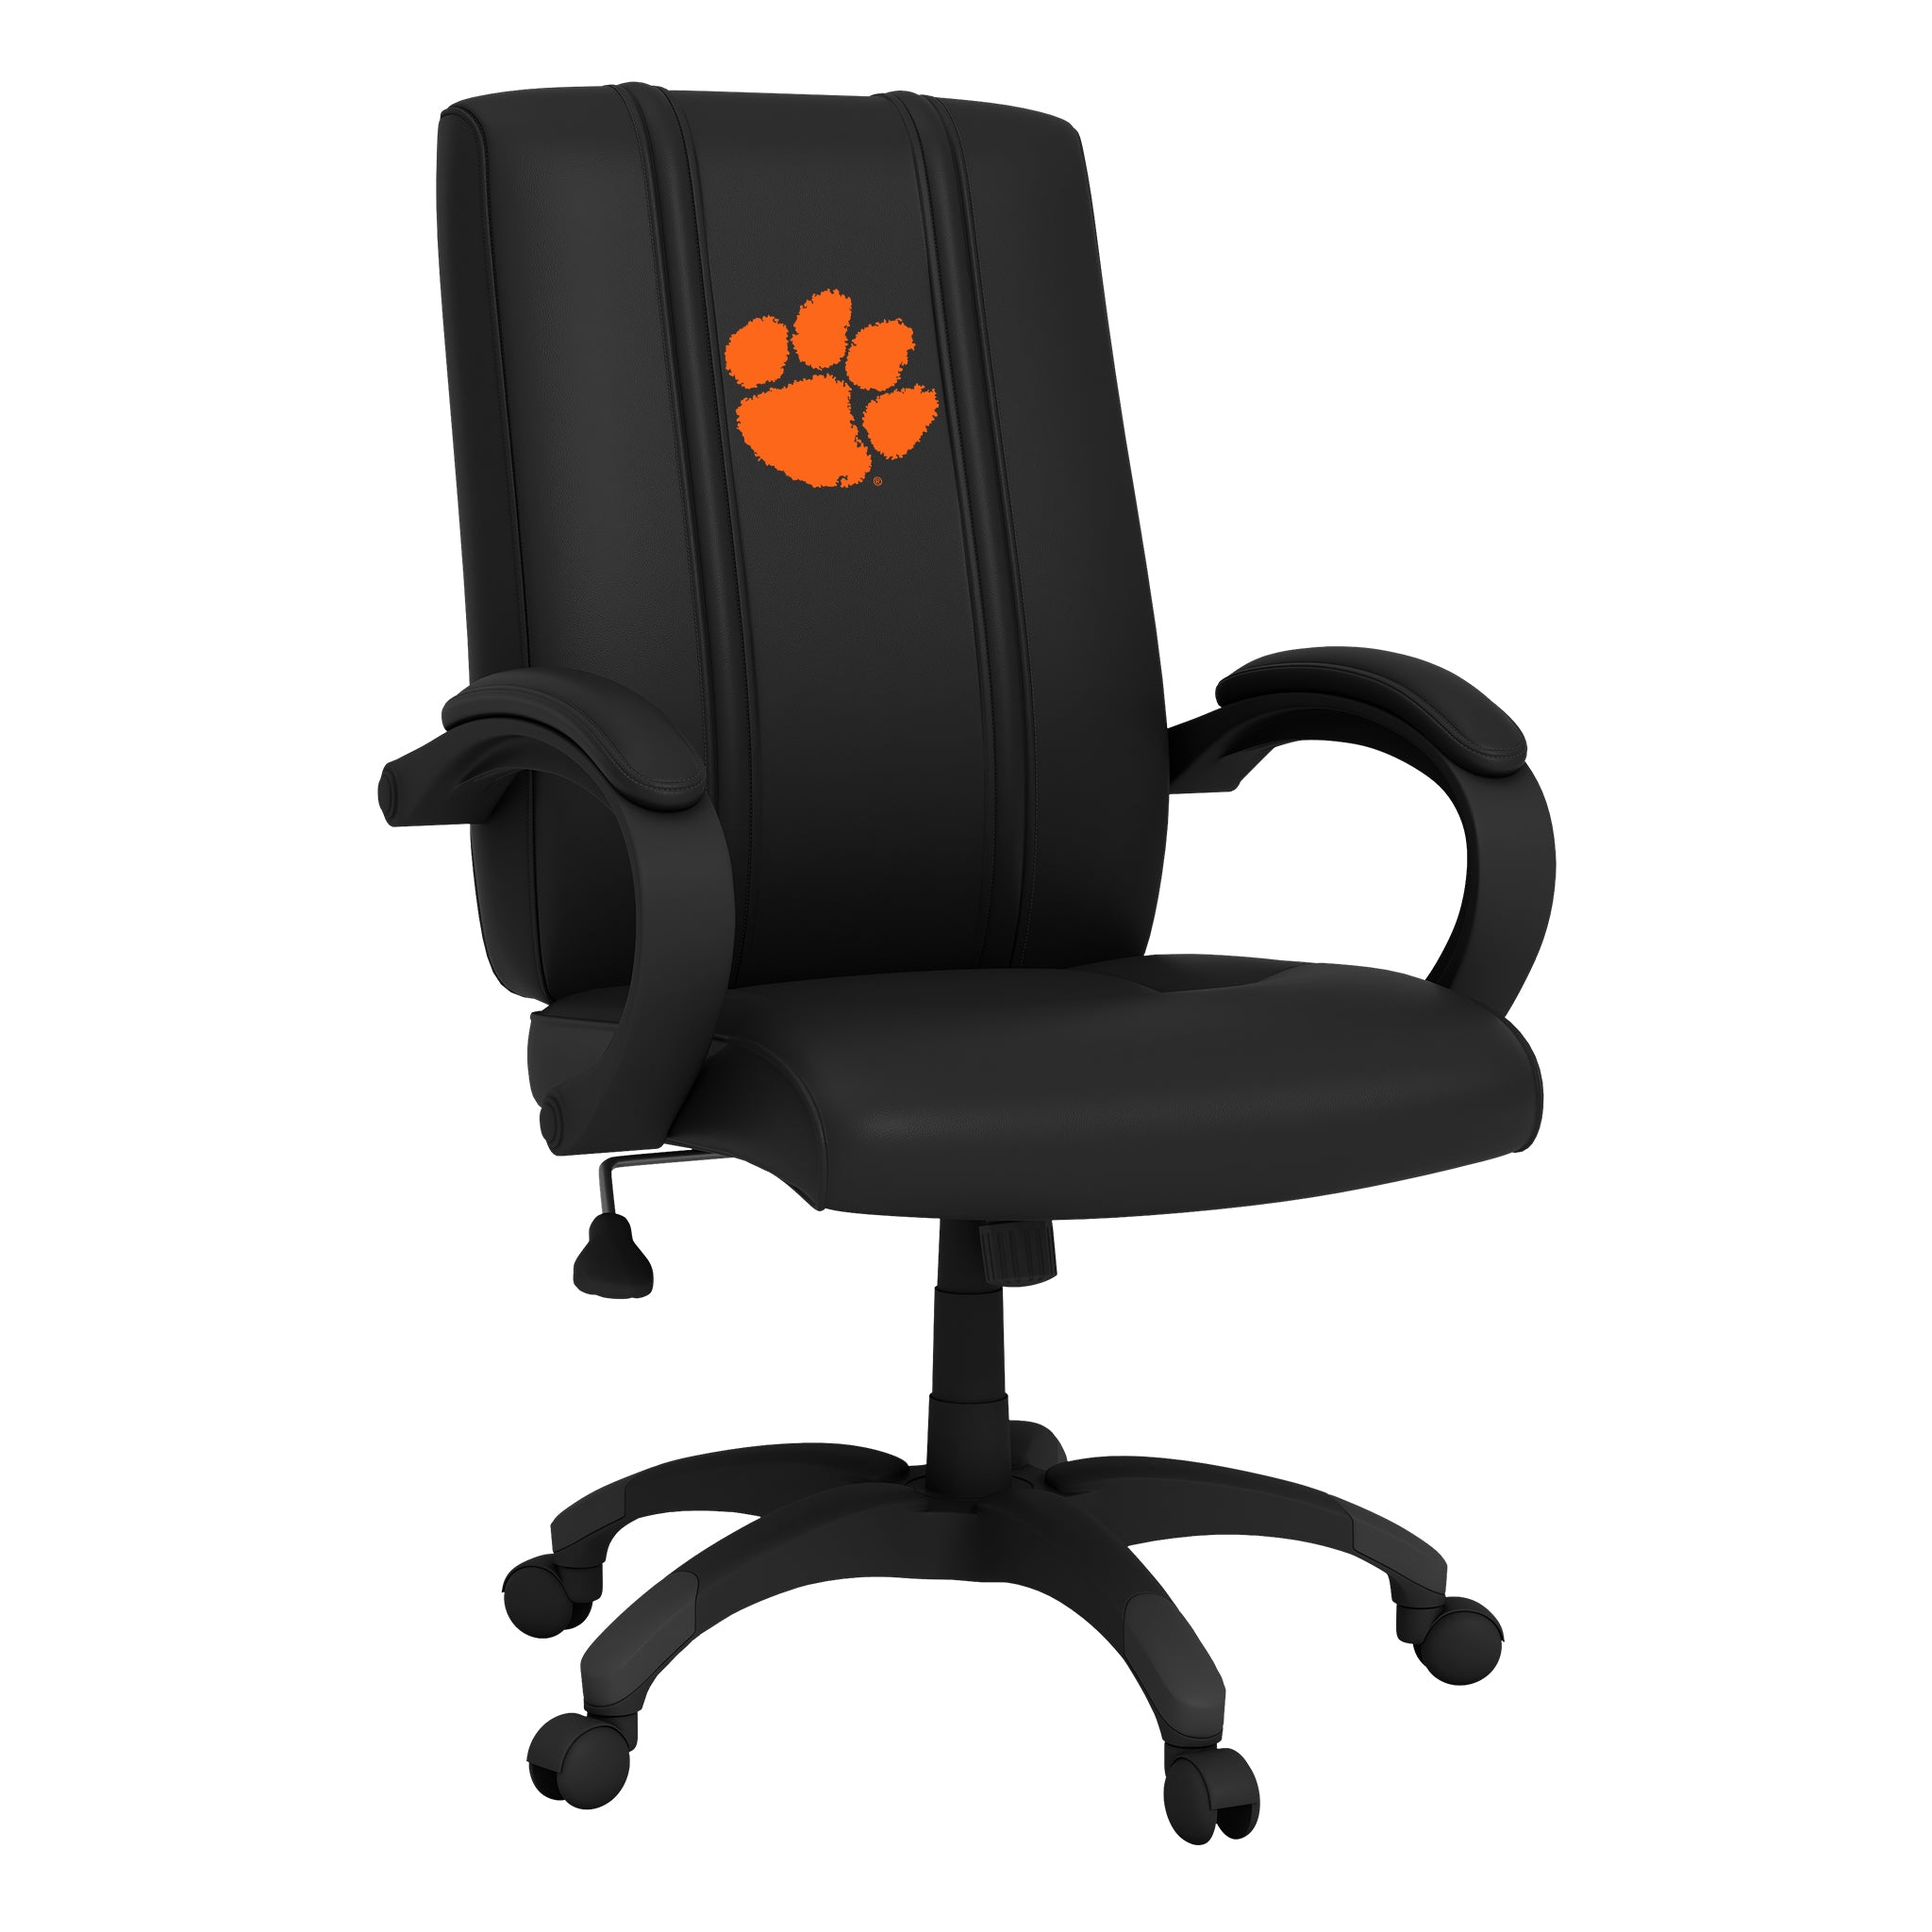 Clemson Tigers Office Chair 1000 with Clemson Tigers Logo